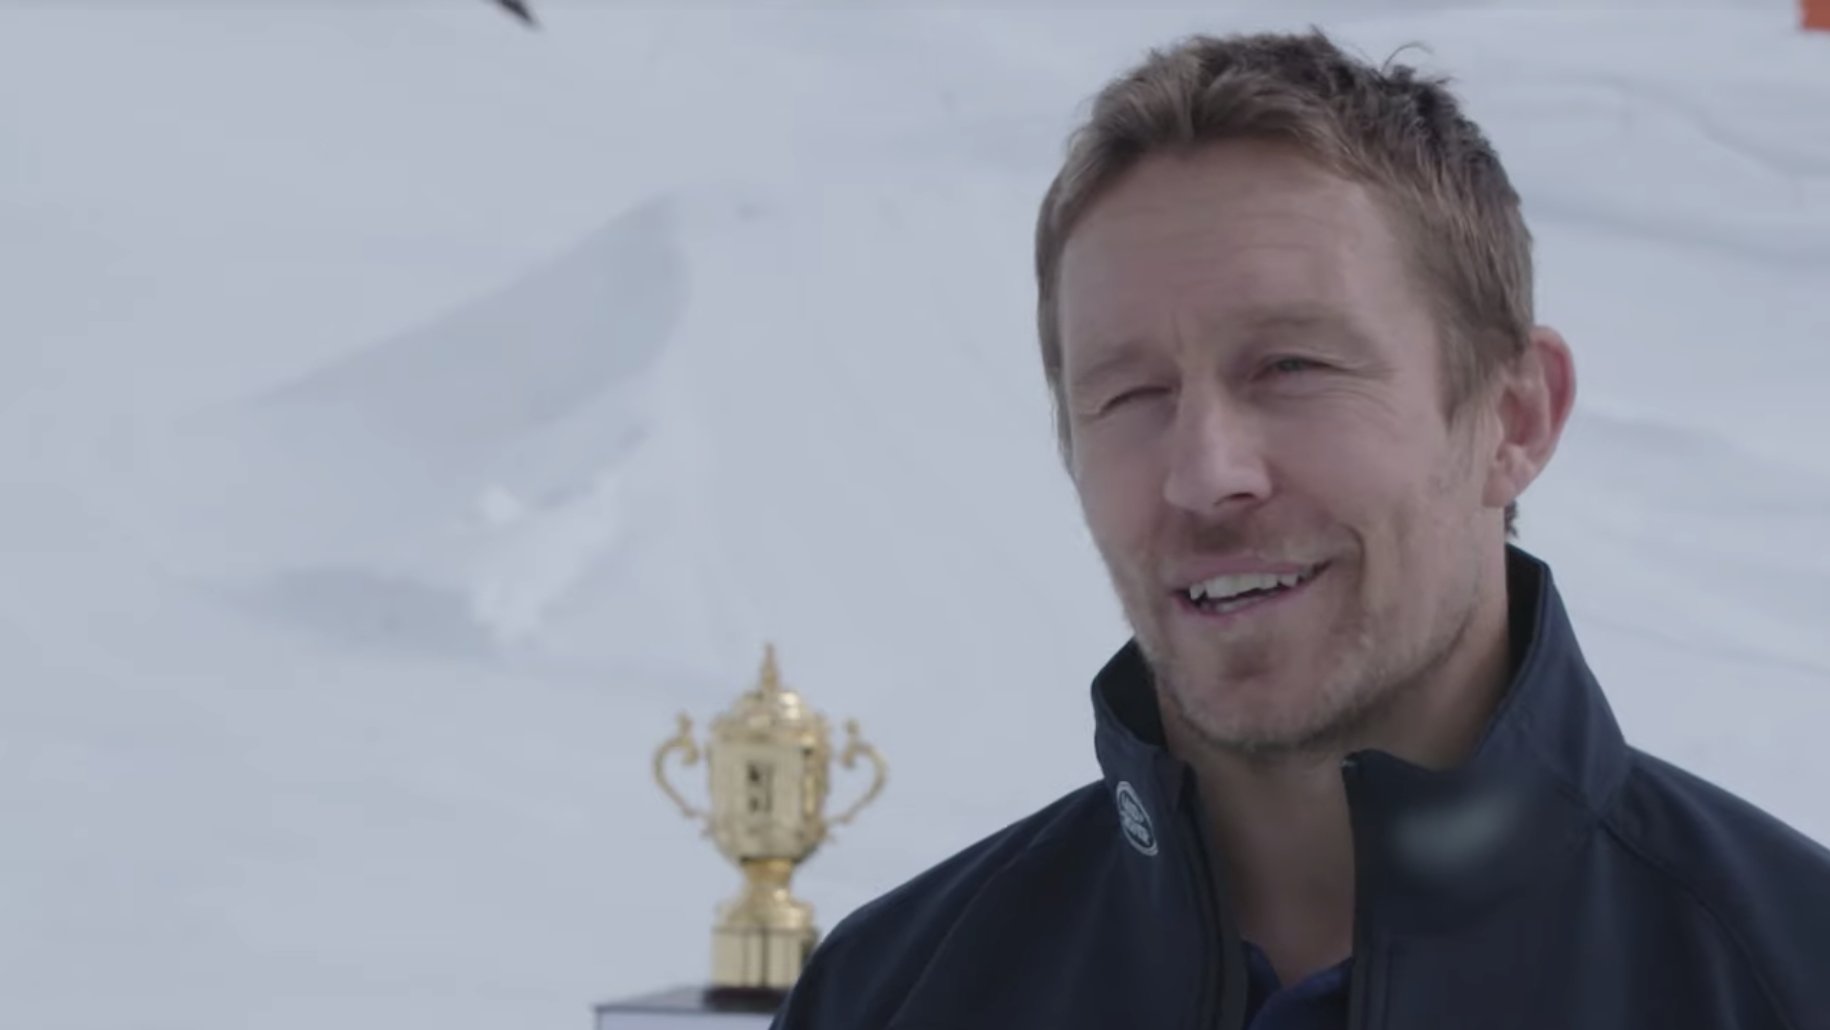 WATCH: Jonny Wilkinson is the most knowledgable man in rugby